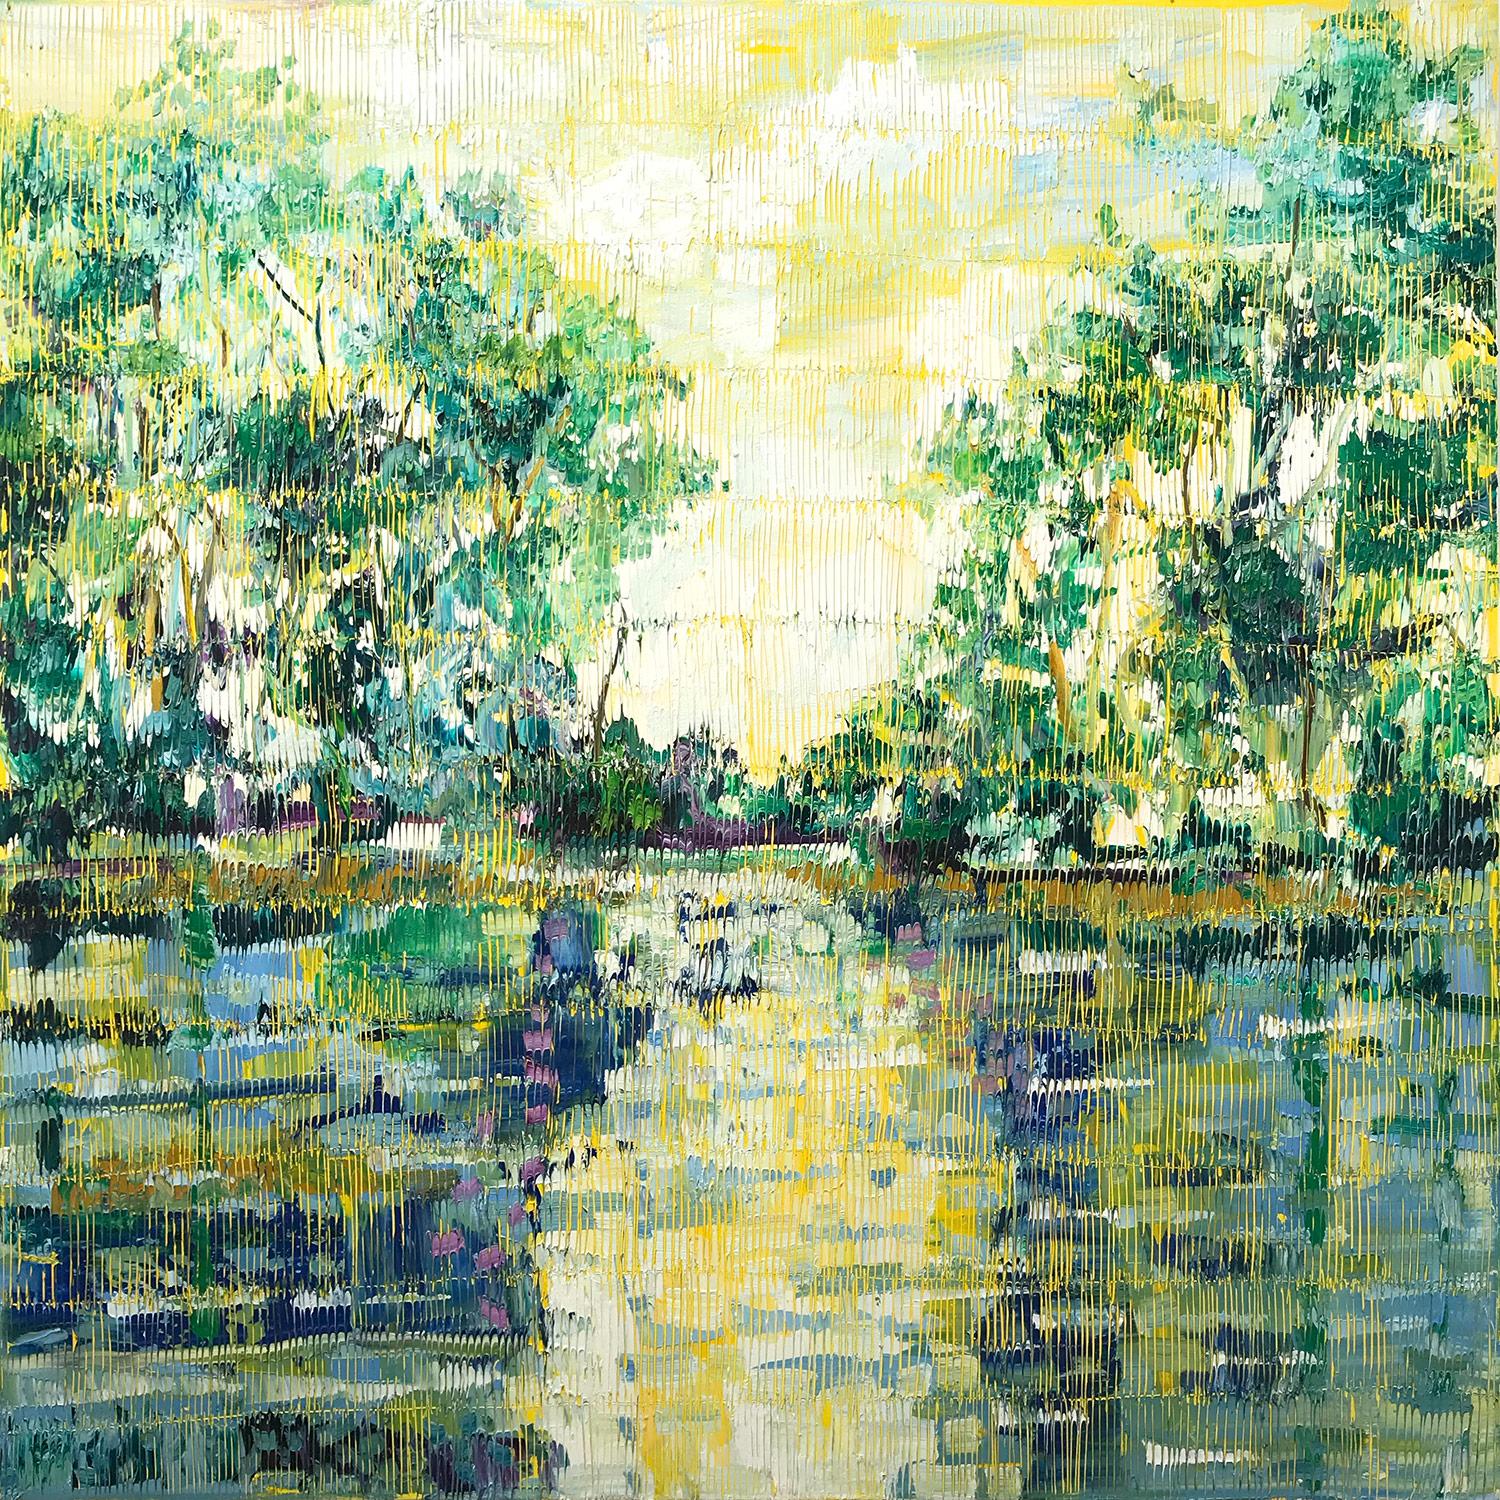 Hunt Slonem Landscape Art - "Bayou Teche" Green, Yellow and Blue toned Landscape Contemporary Oil Painting